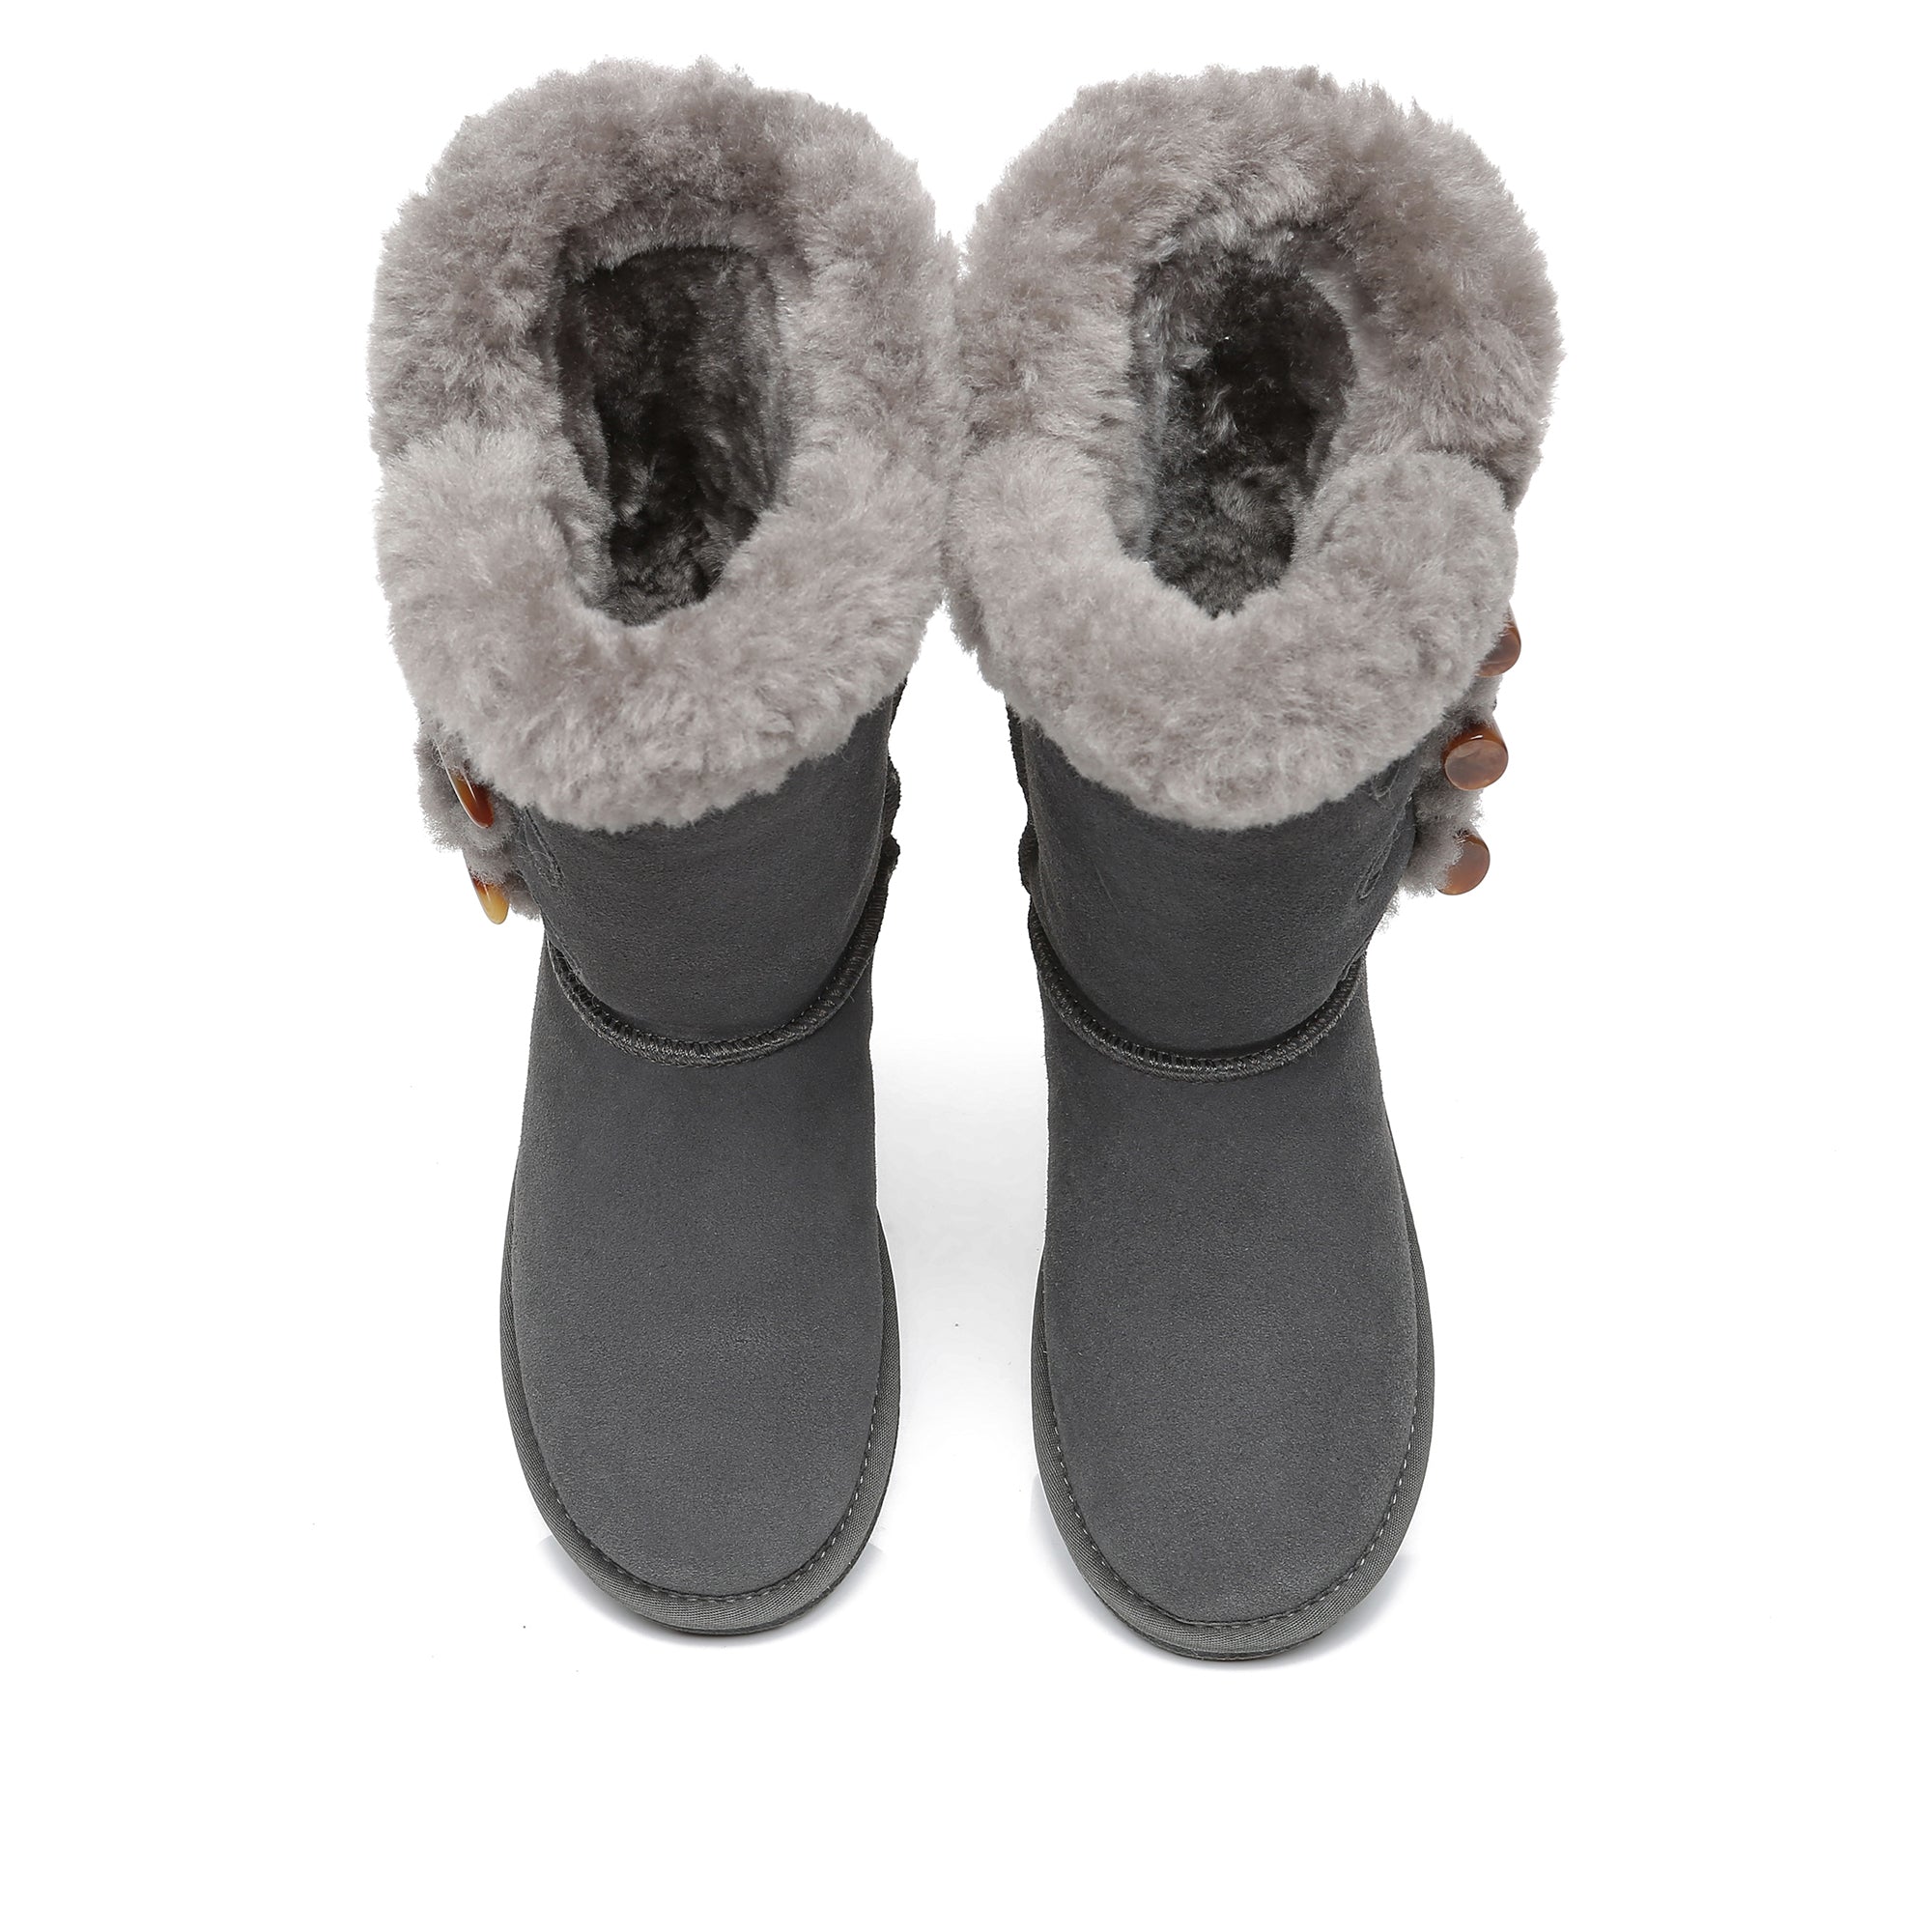 Tall 3-Buttons Toggle UGG Boots